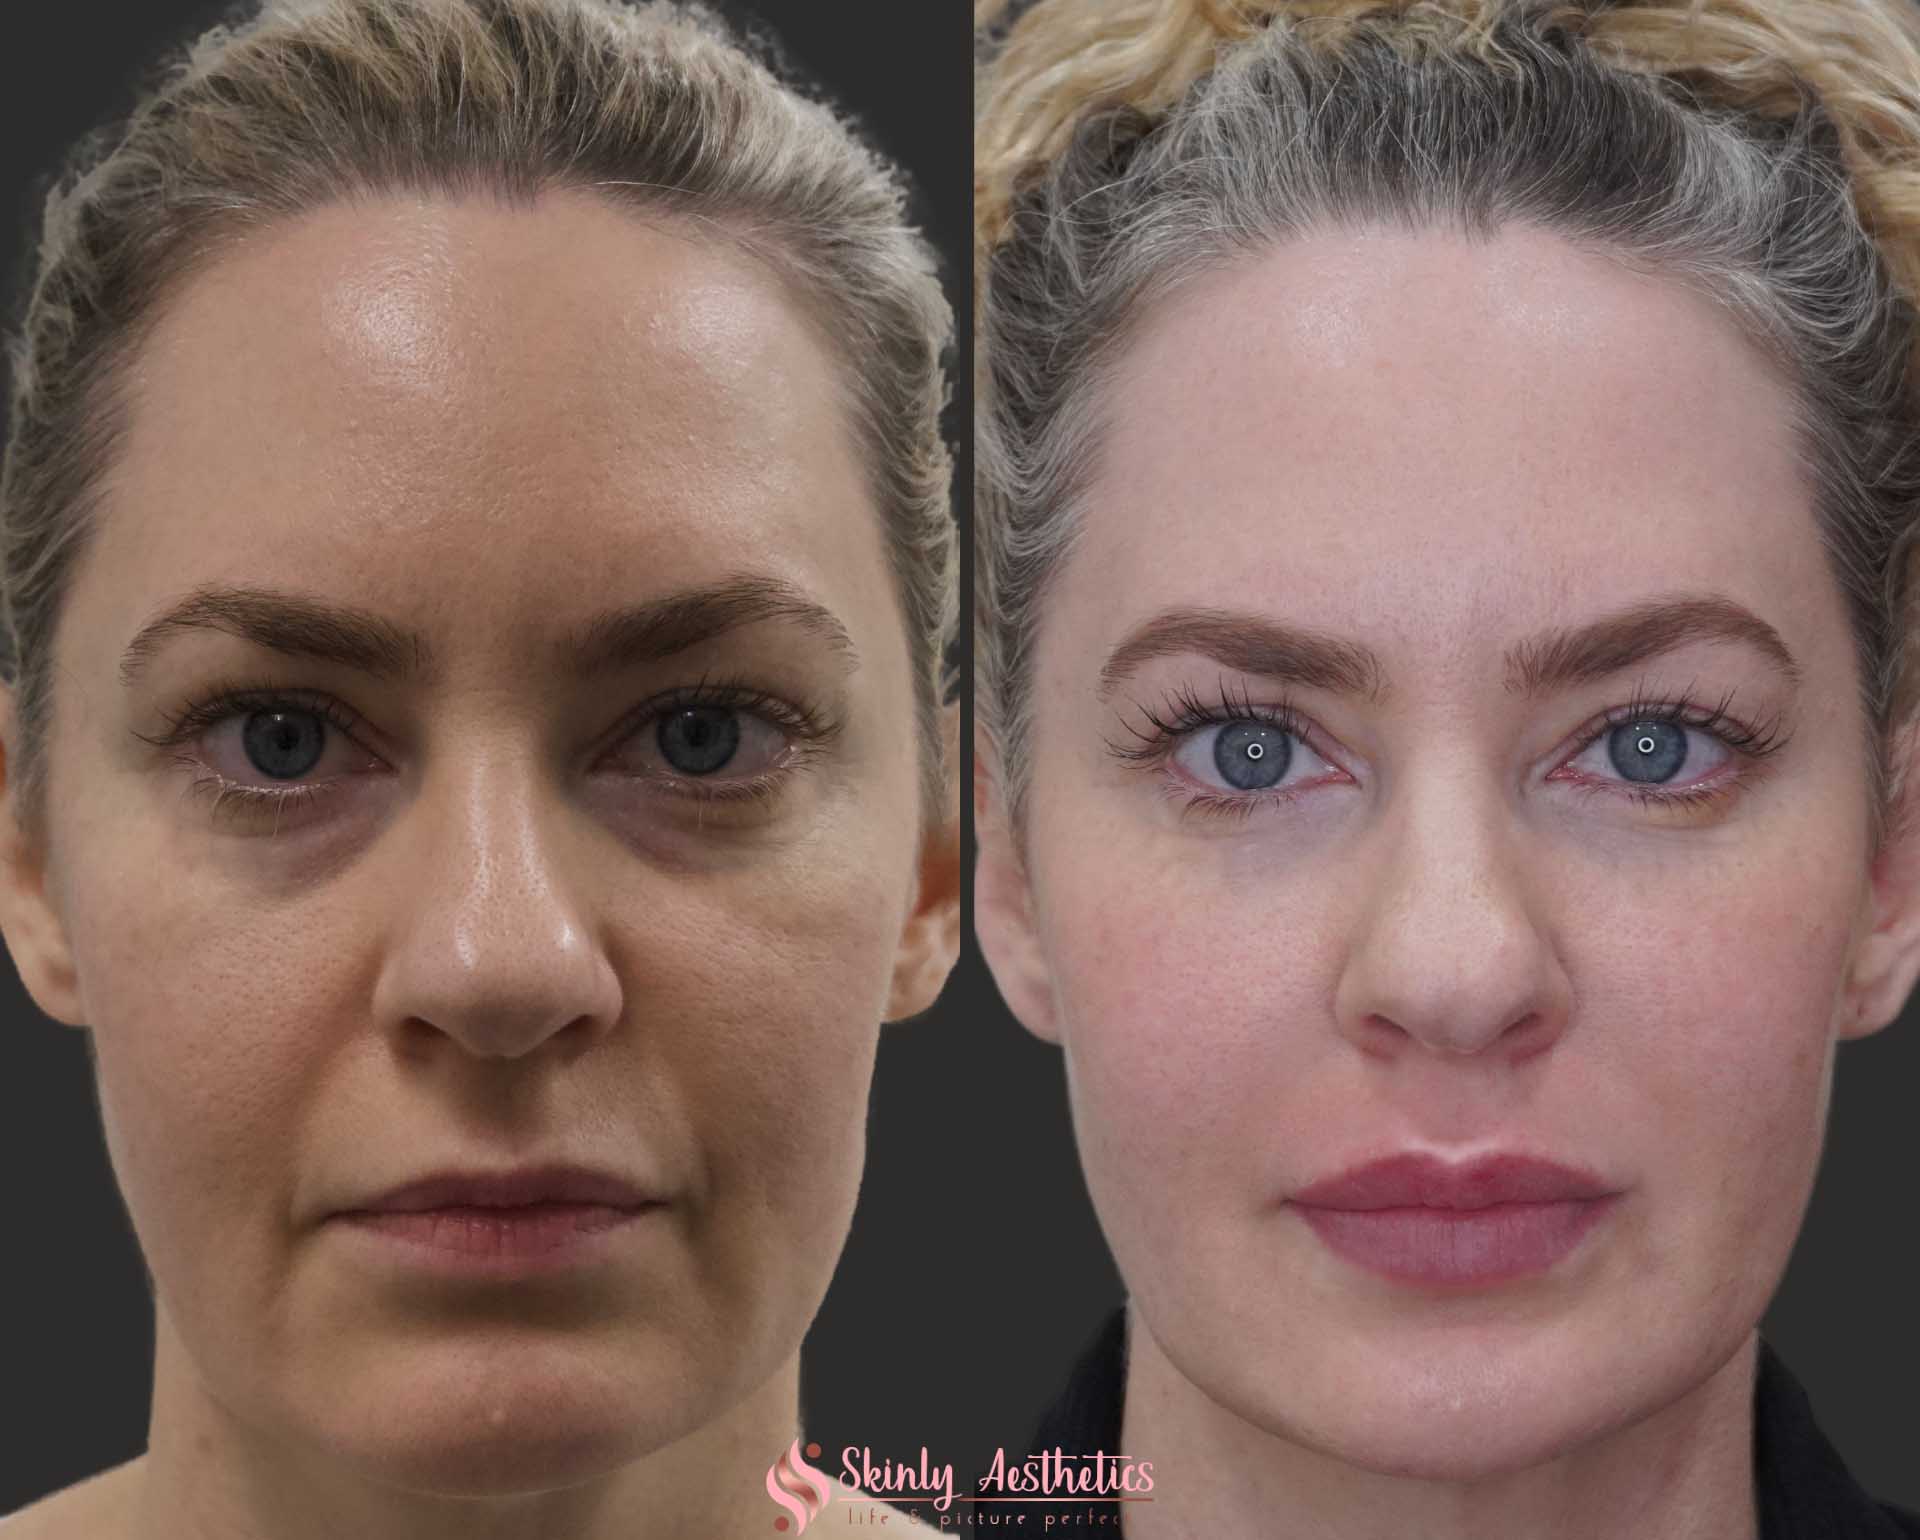 before and after results following Juvederm dermal filler injections for under eye circles